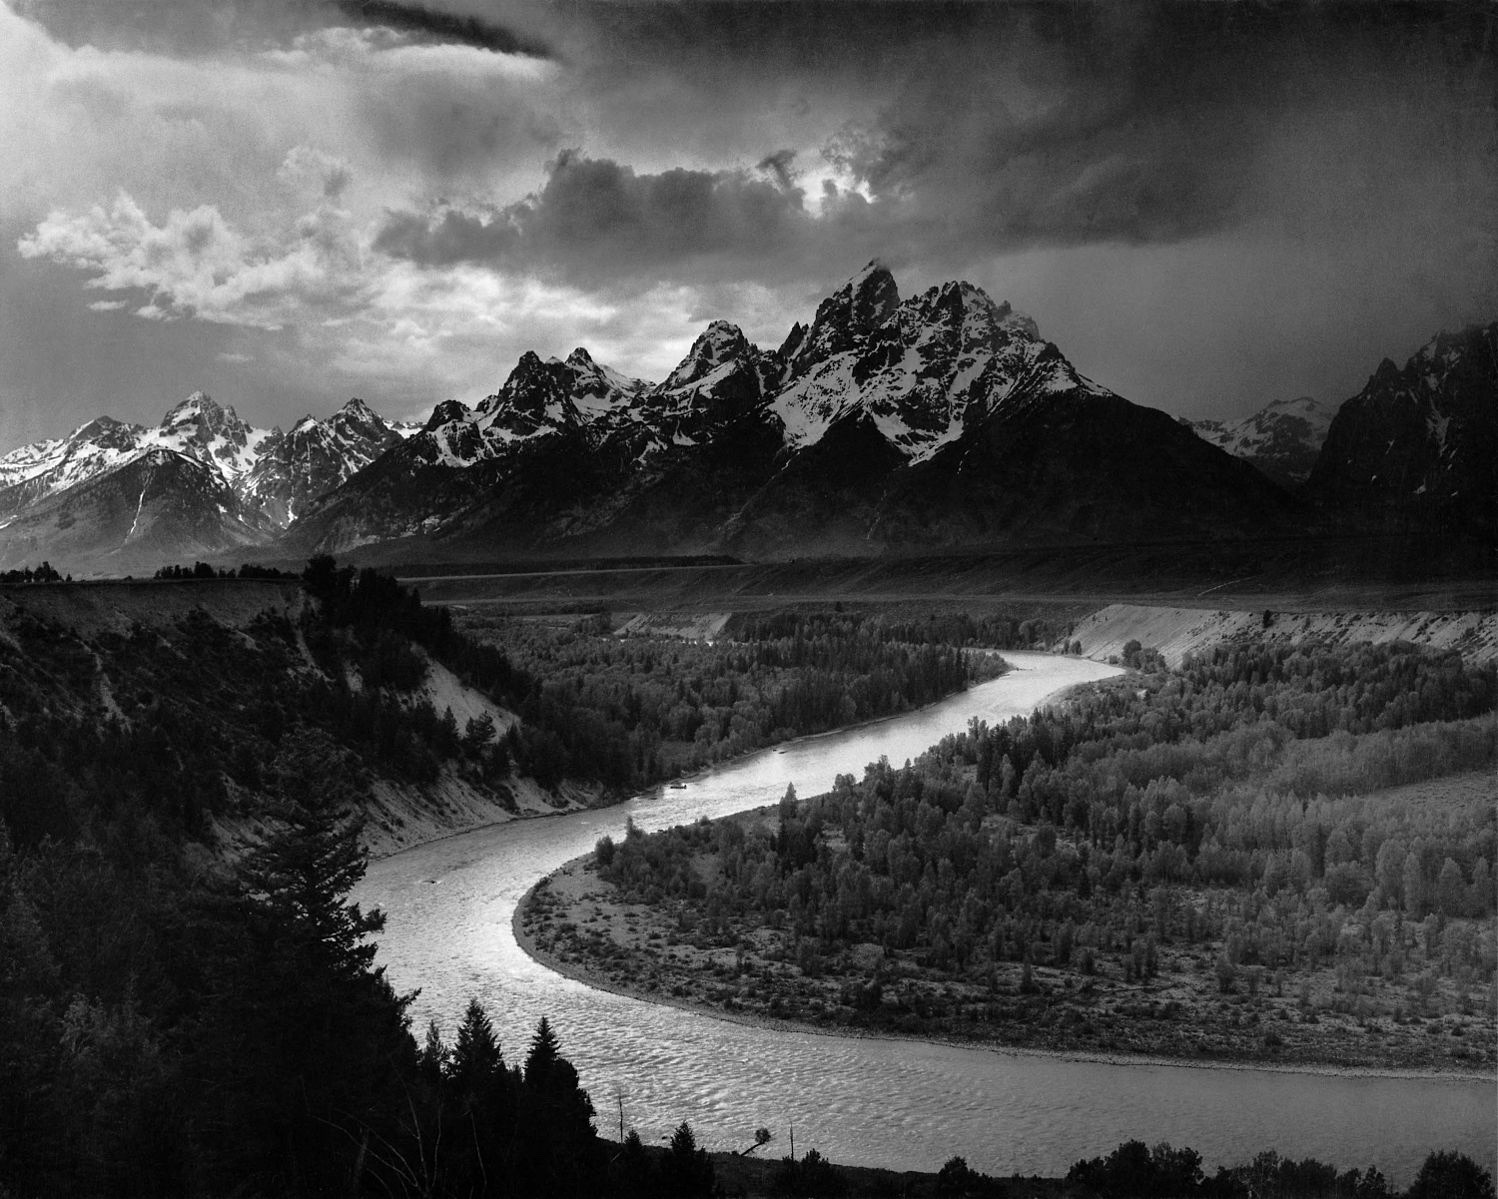 "The Tetons and the Snake River," Ansel Adams' famous portrait of the Snake River in Grand Teton National Park.  A wending jewel in Greater Yellowstone, the Snake marries the Columbia River and is liquid lifeblood for the natural landscape, tourist economy, municipal water supplies and vital source for big agriculture in Idaho.  Photo courtesy National Park Service